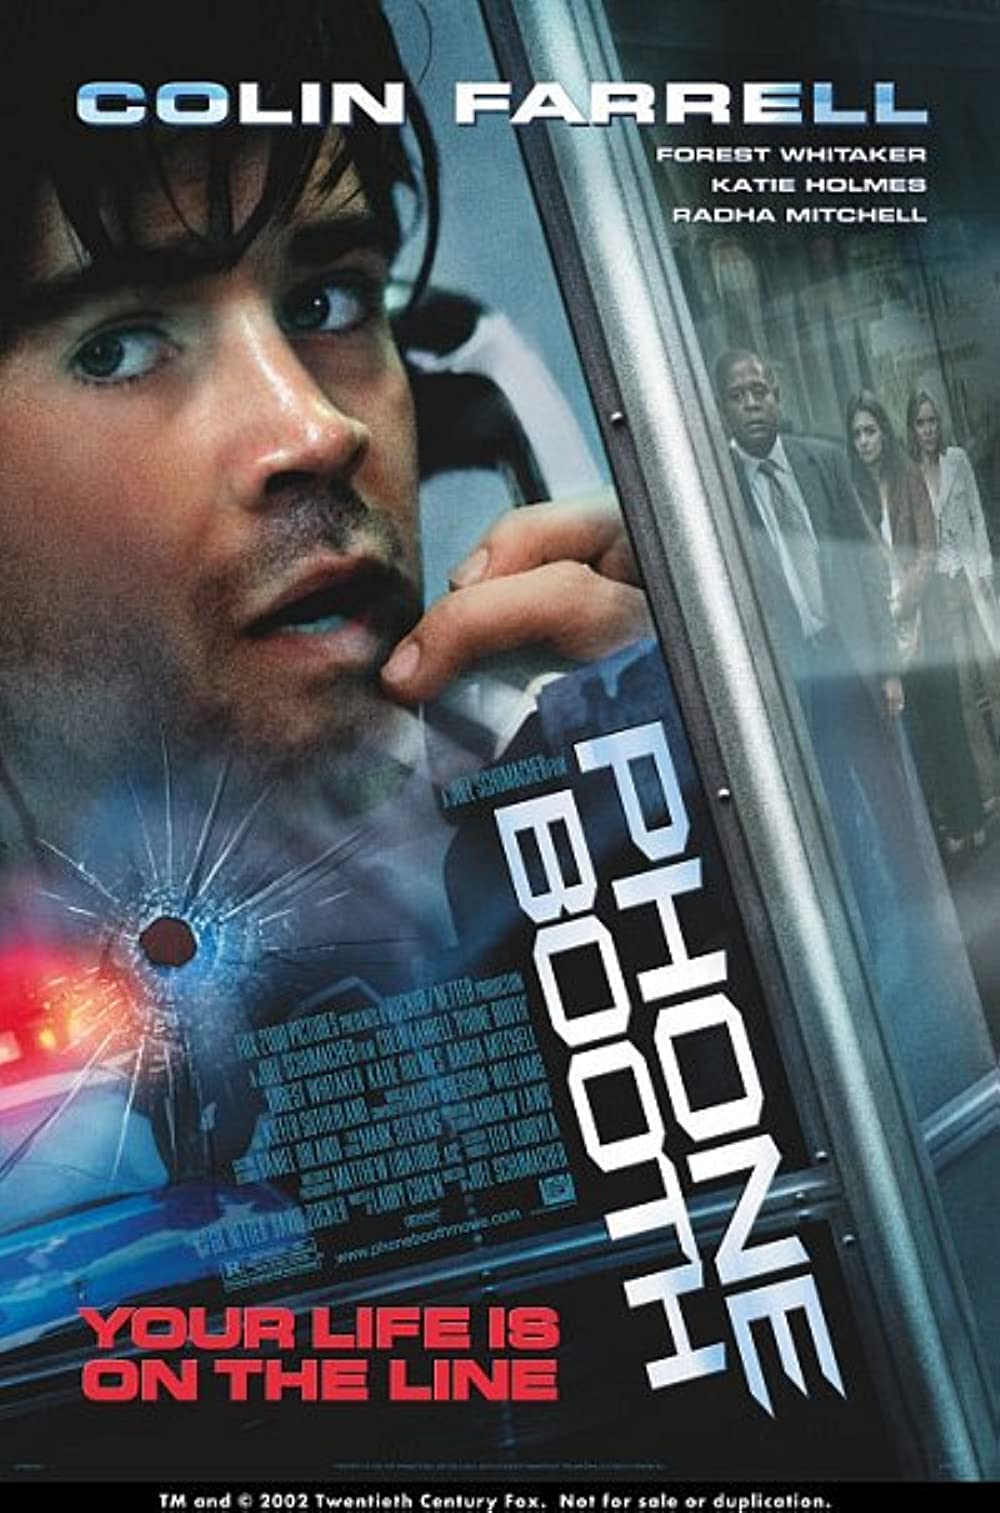 FULL MOVIE: Phone Booth (2002) [Crime]